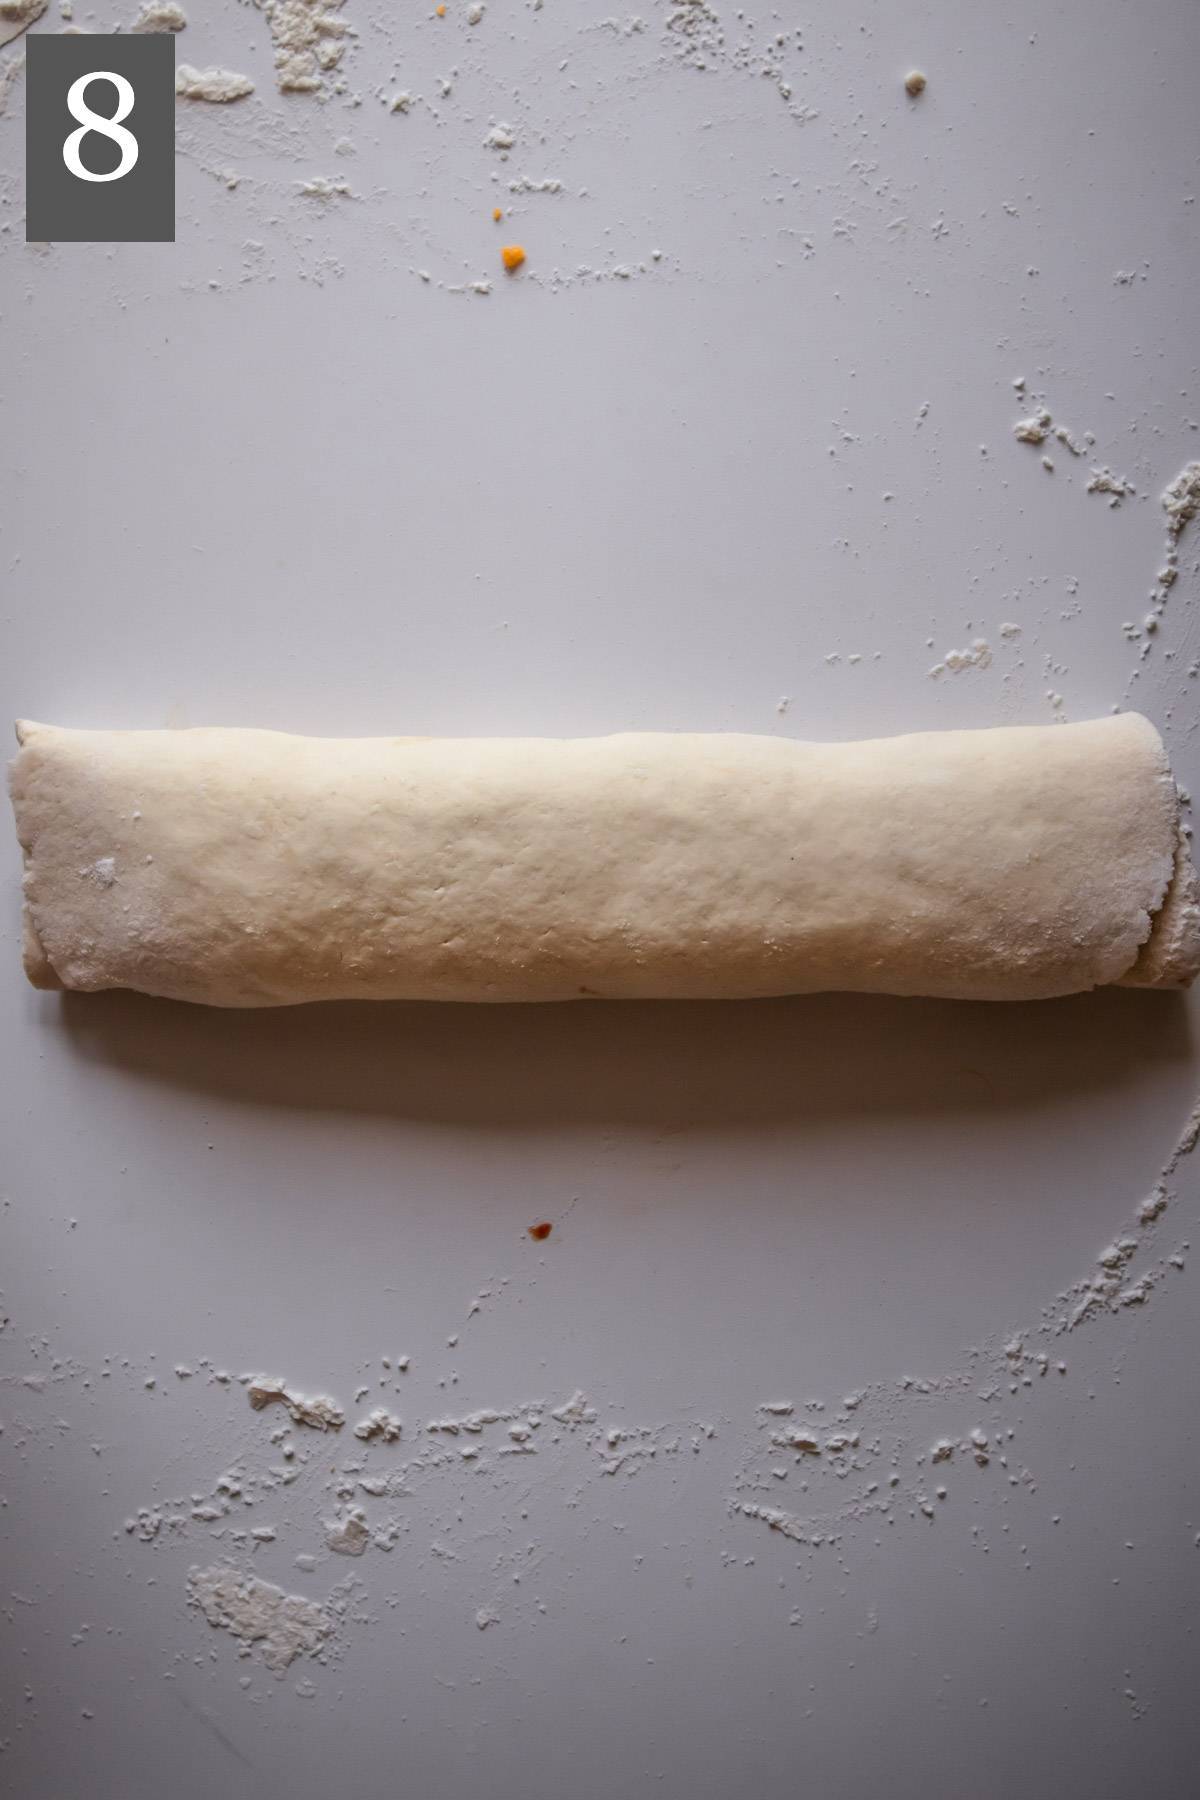 The pizza dough rolled into a log.